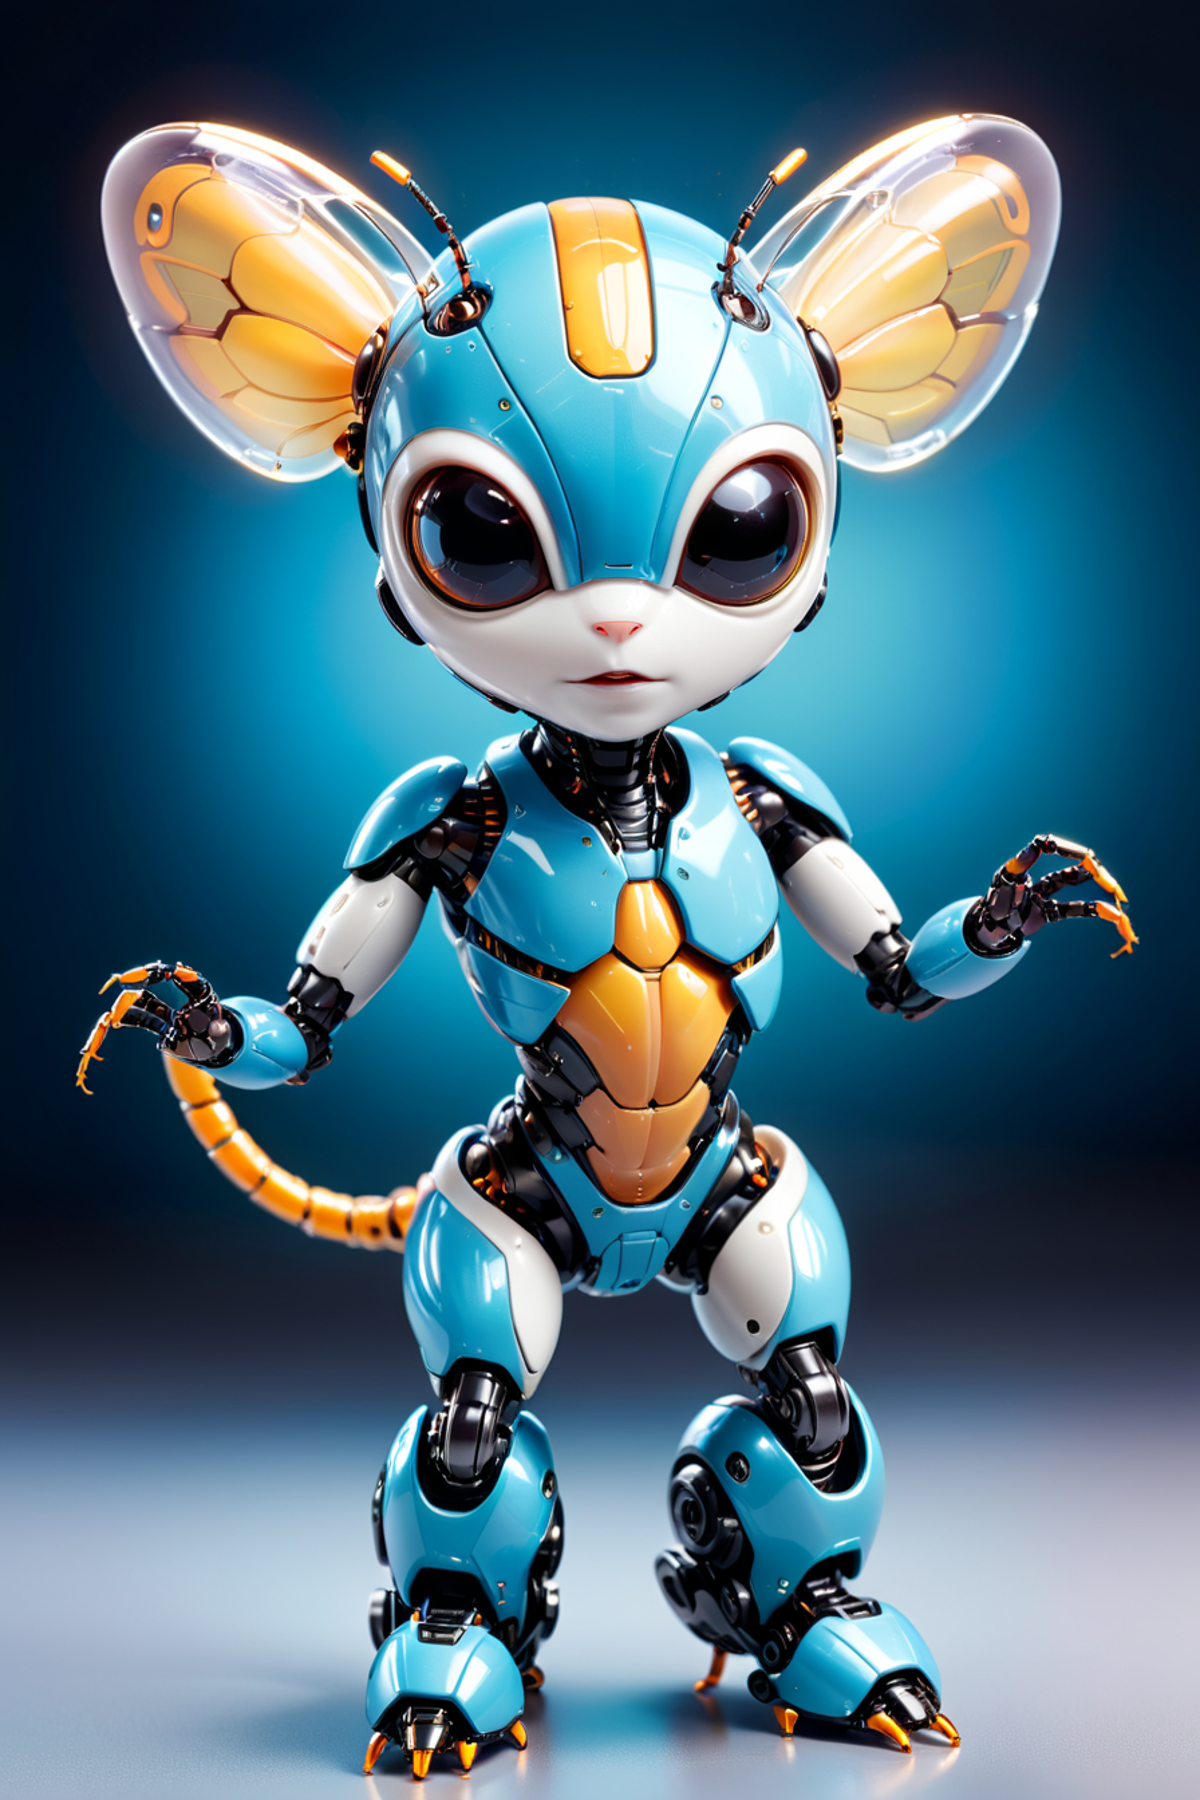 A Blue and Yellow Robotic Mouse Toy.